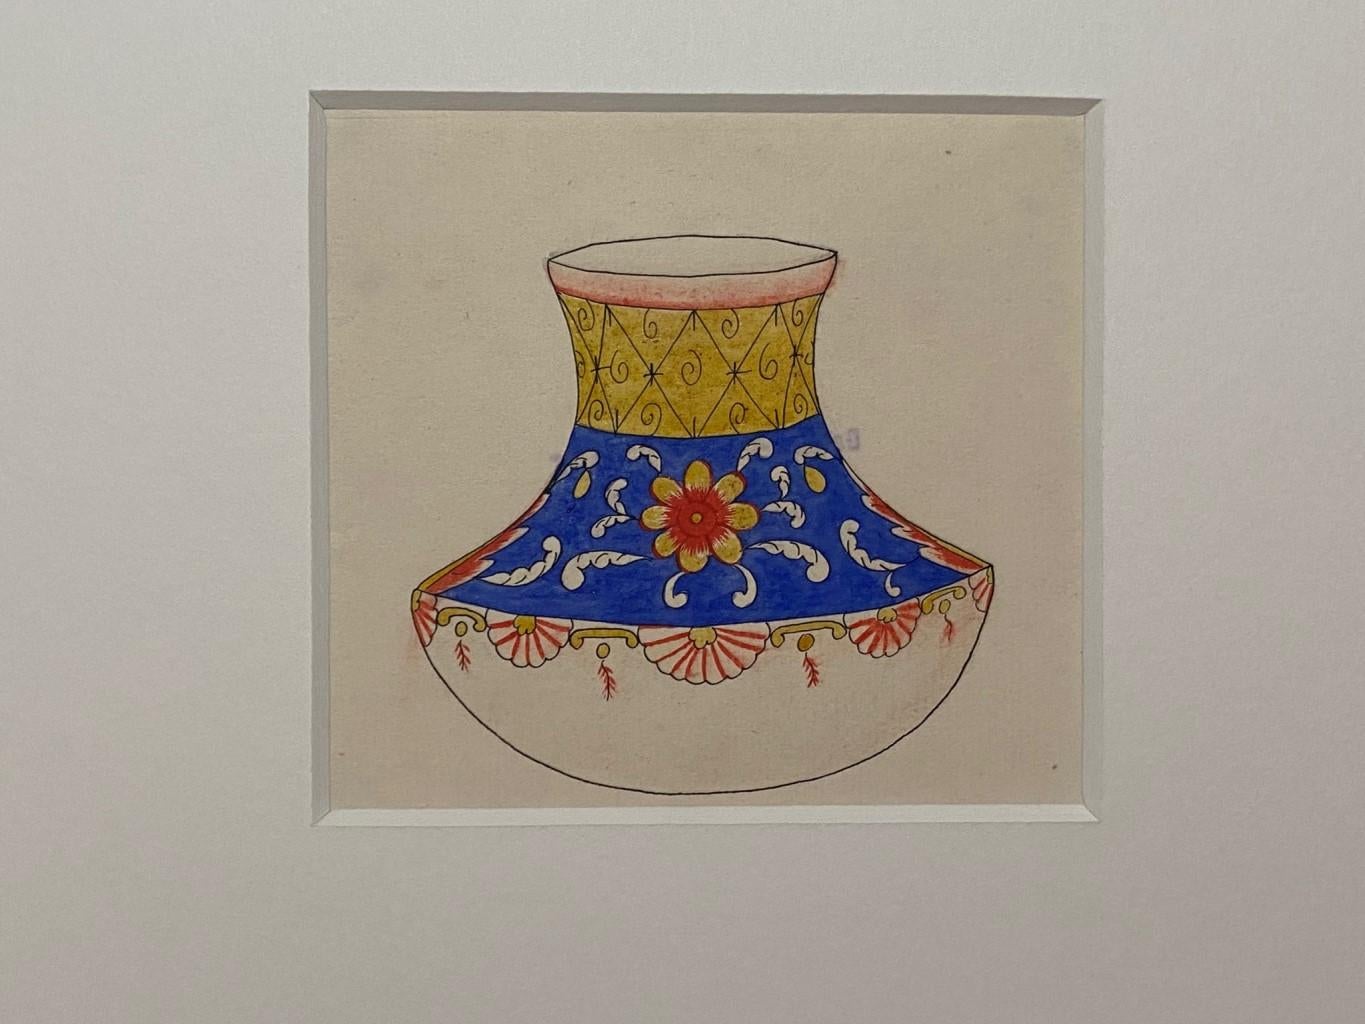 Porcelain Vase - Original China Ink and Watercolor - Late 19th Century - Art by Unknown